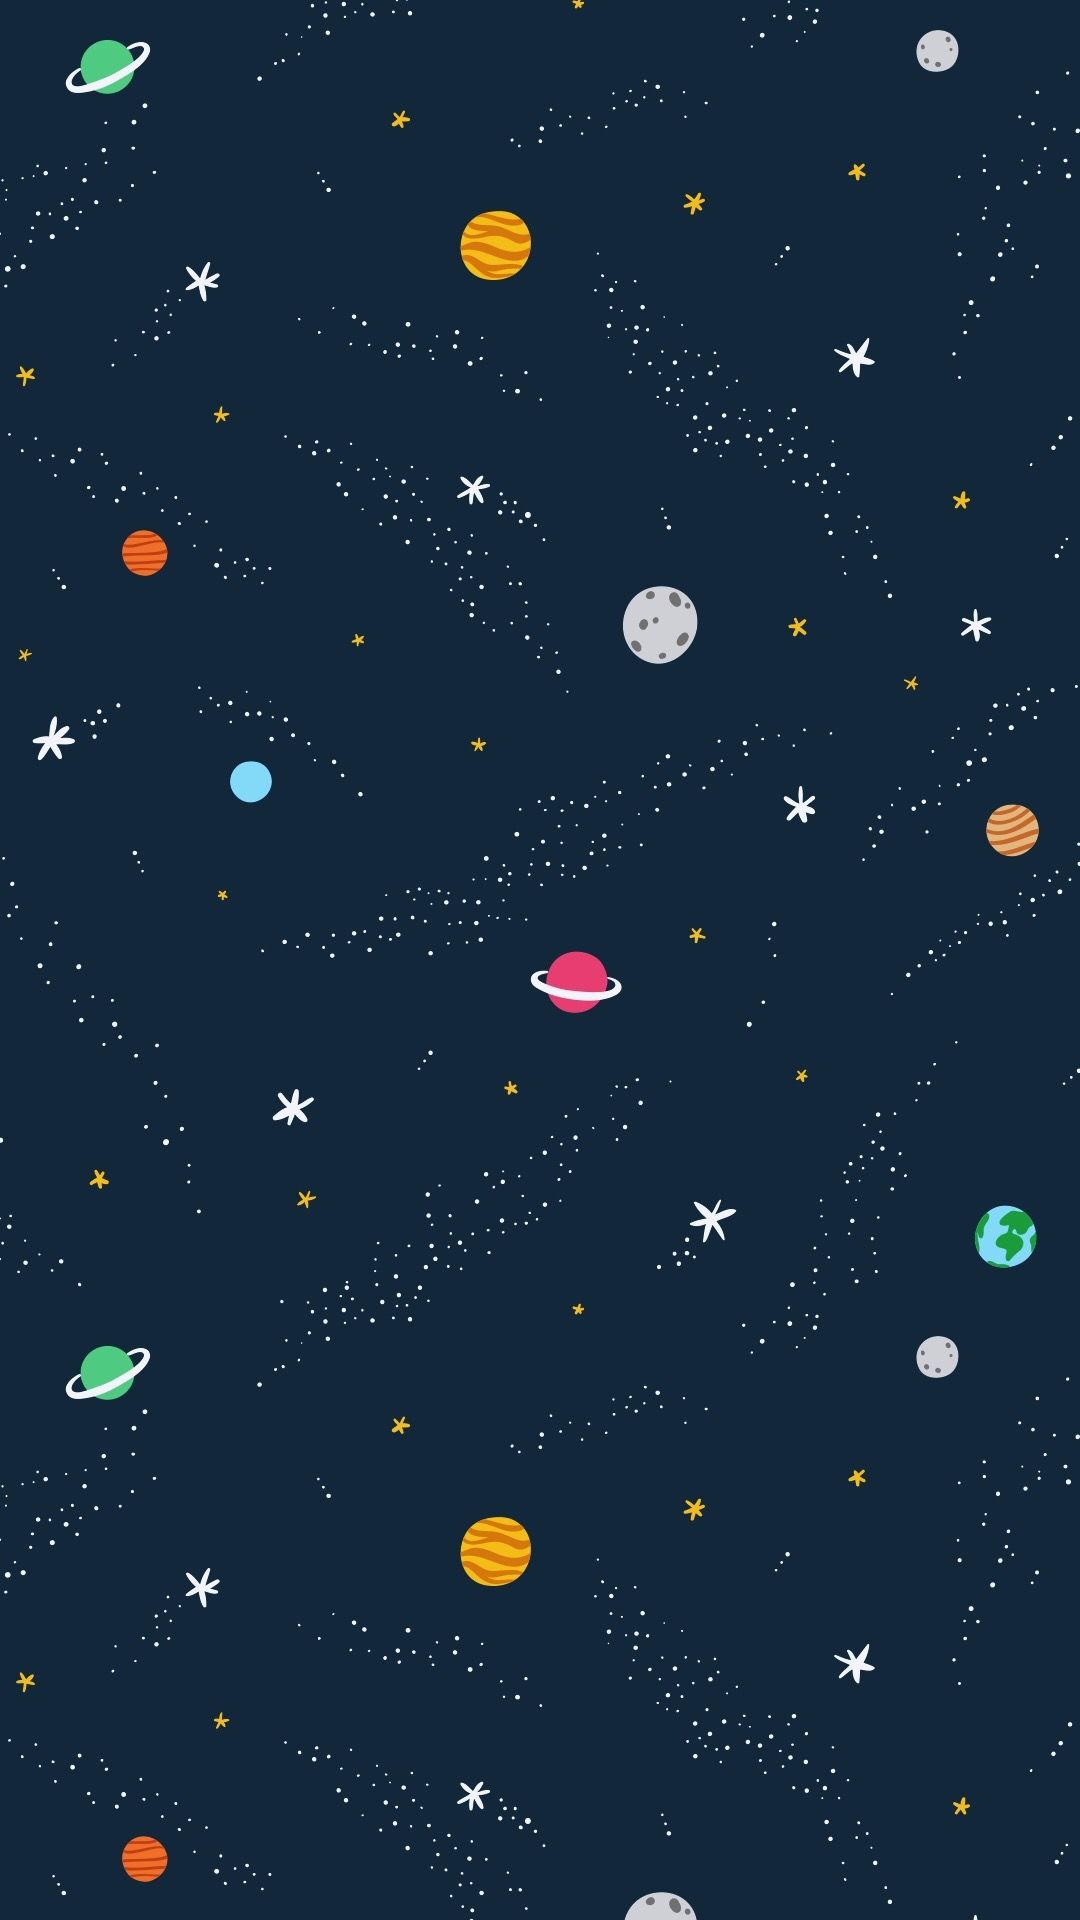 IPhone wallpaper of a space pattern with stars and planets - Space, planet, pretty